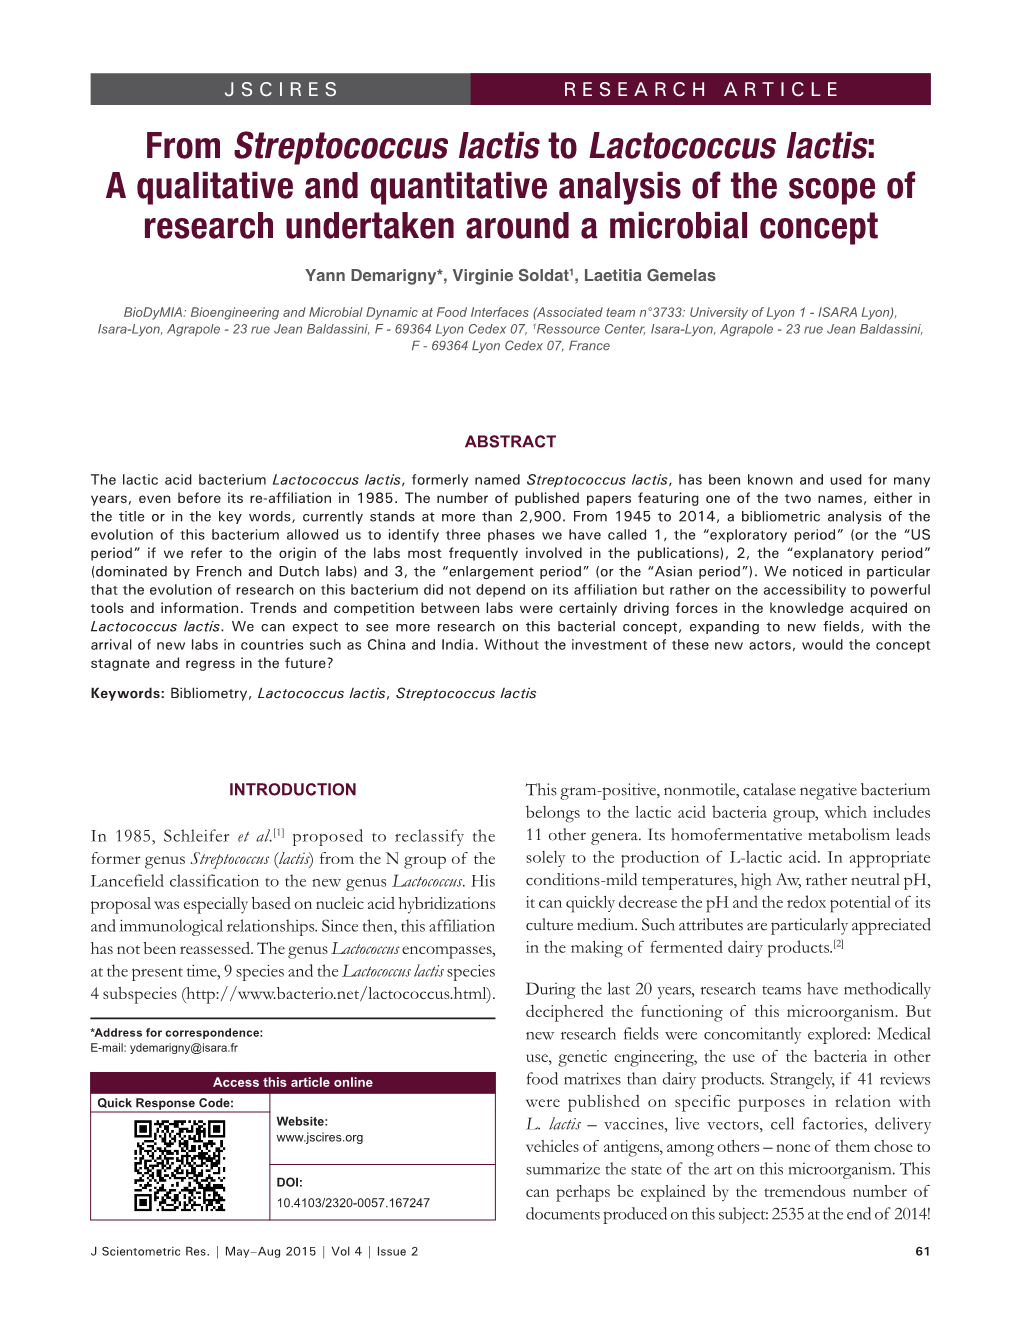 From Streptococcus Lactis to Lactococcus Lactis: a Qualitative and Quantitative Analysis of the Scope of Research Undertaken Around a Microbial Concept